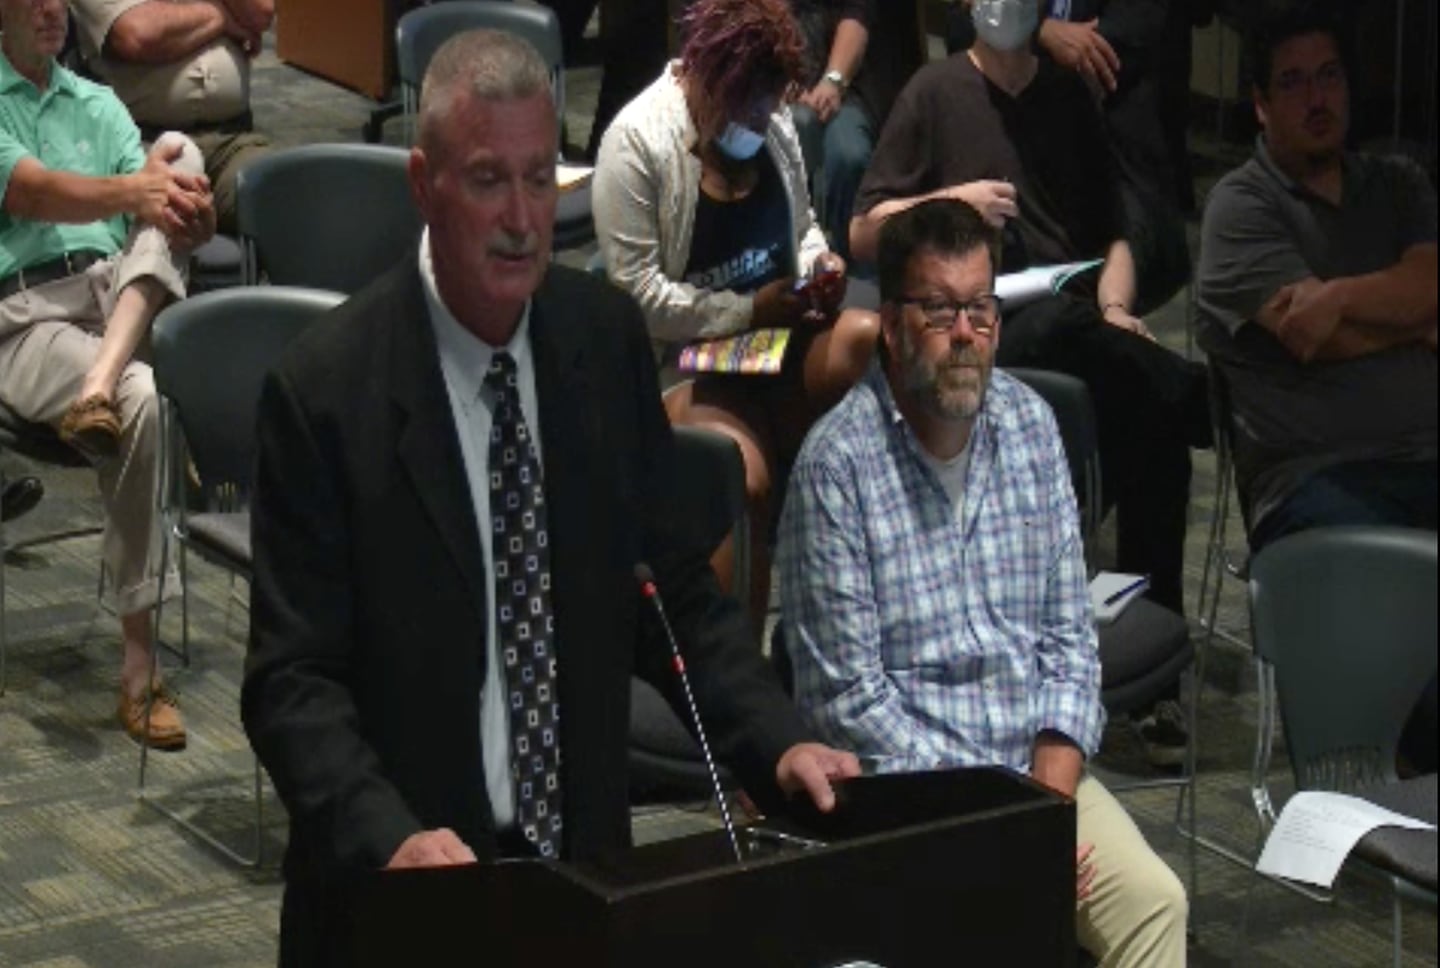 Dwayne Killian, retired Joliet police sergeant and former member of the Tri-County Auto Theft Task Force, speaks before the Joliet City Council on July 6, 2021.